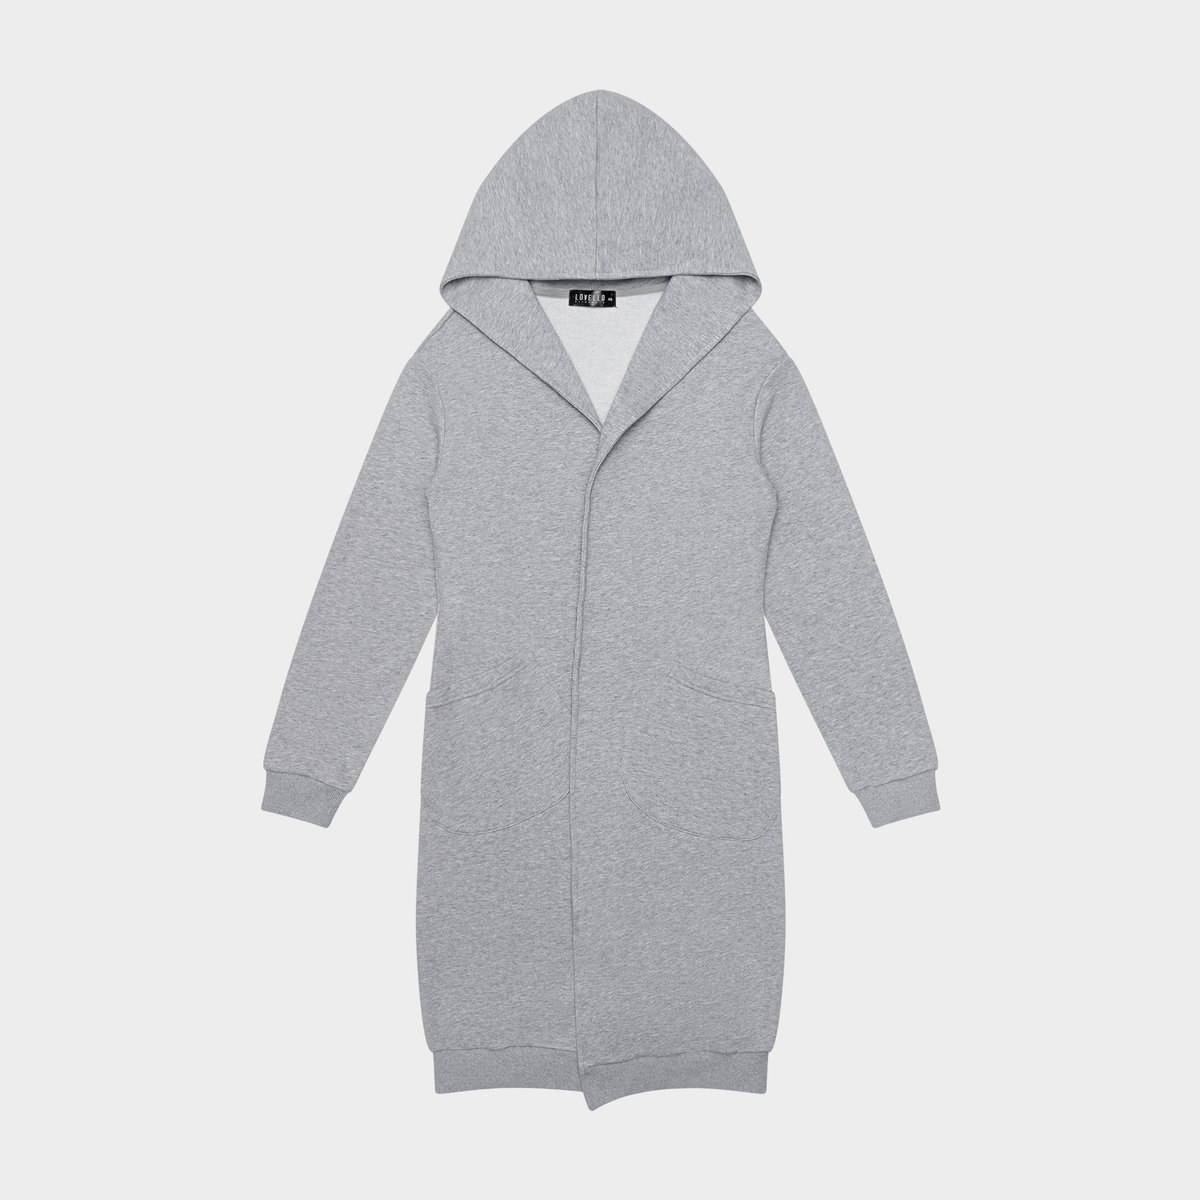 gray hoodie robe with pockets